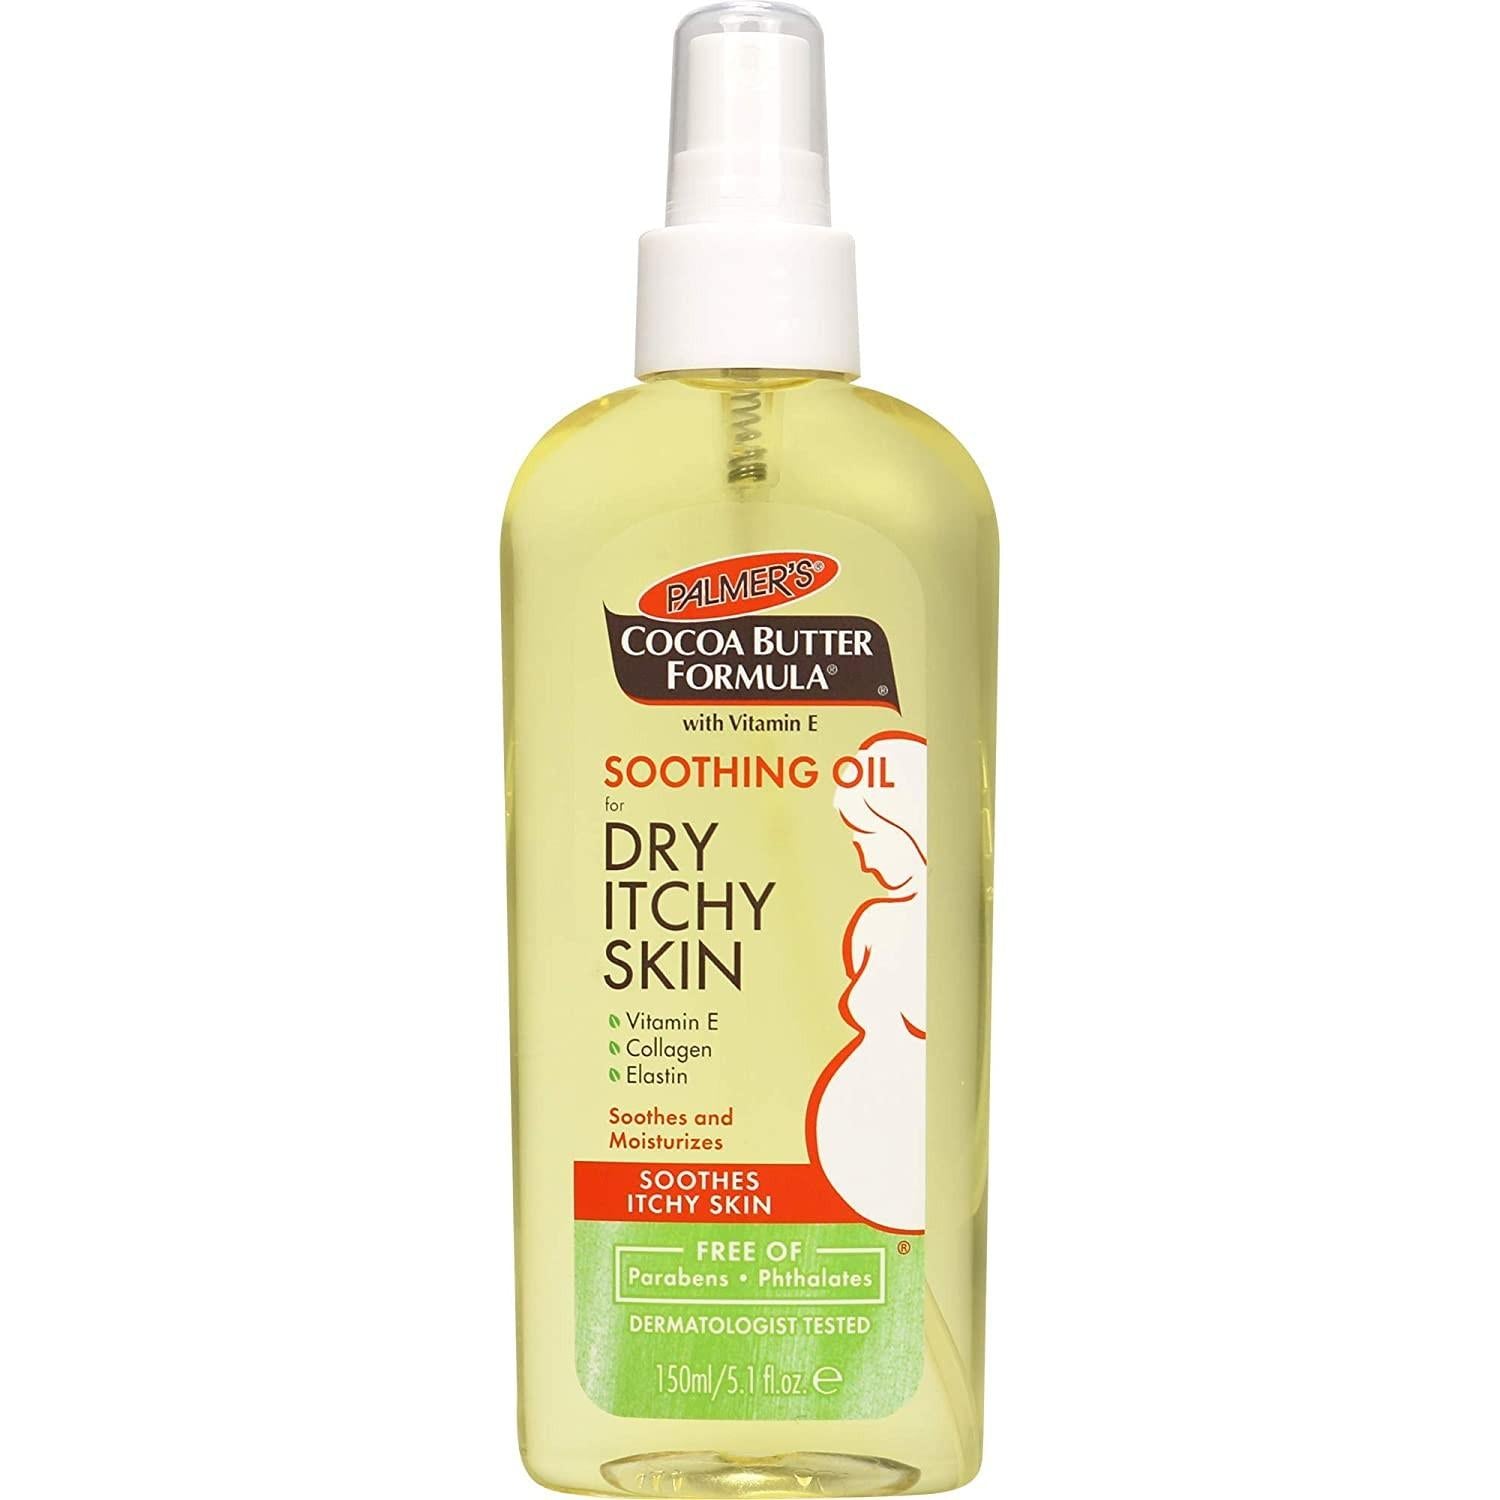 PALMER'S COCOA BUTTER FORMULA DRY ITCHY SKIN SOOTHING OIL 8.5oz-Palmer's- Hive Beauty Supply